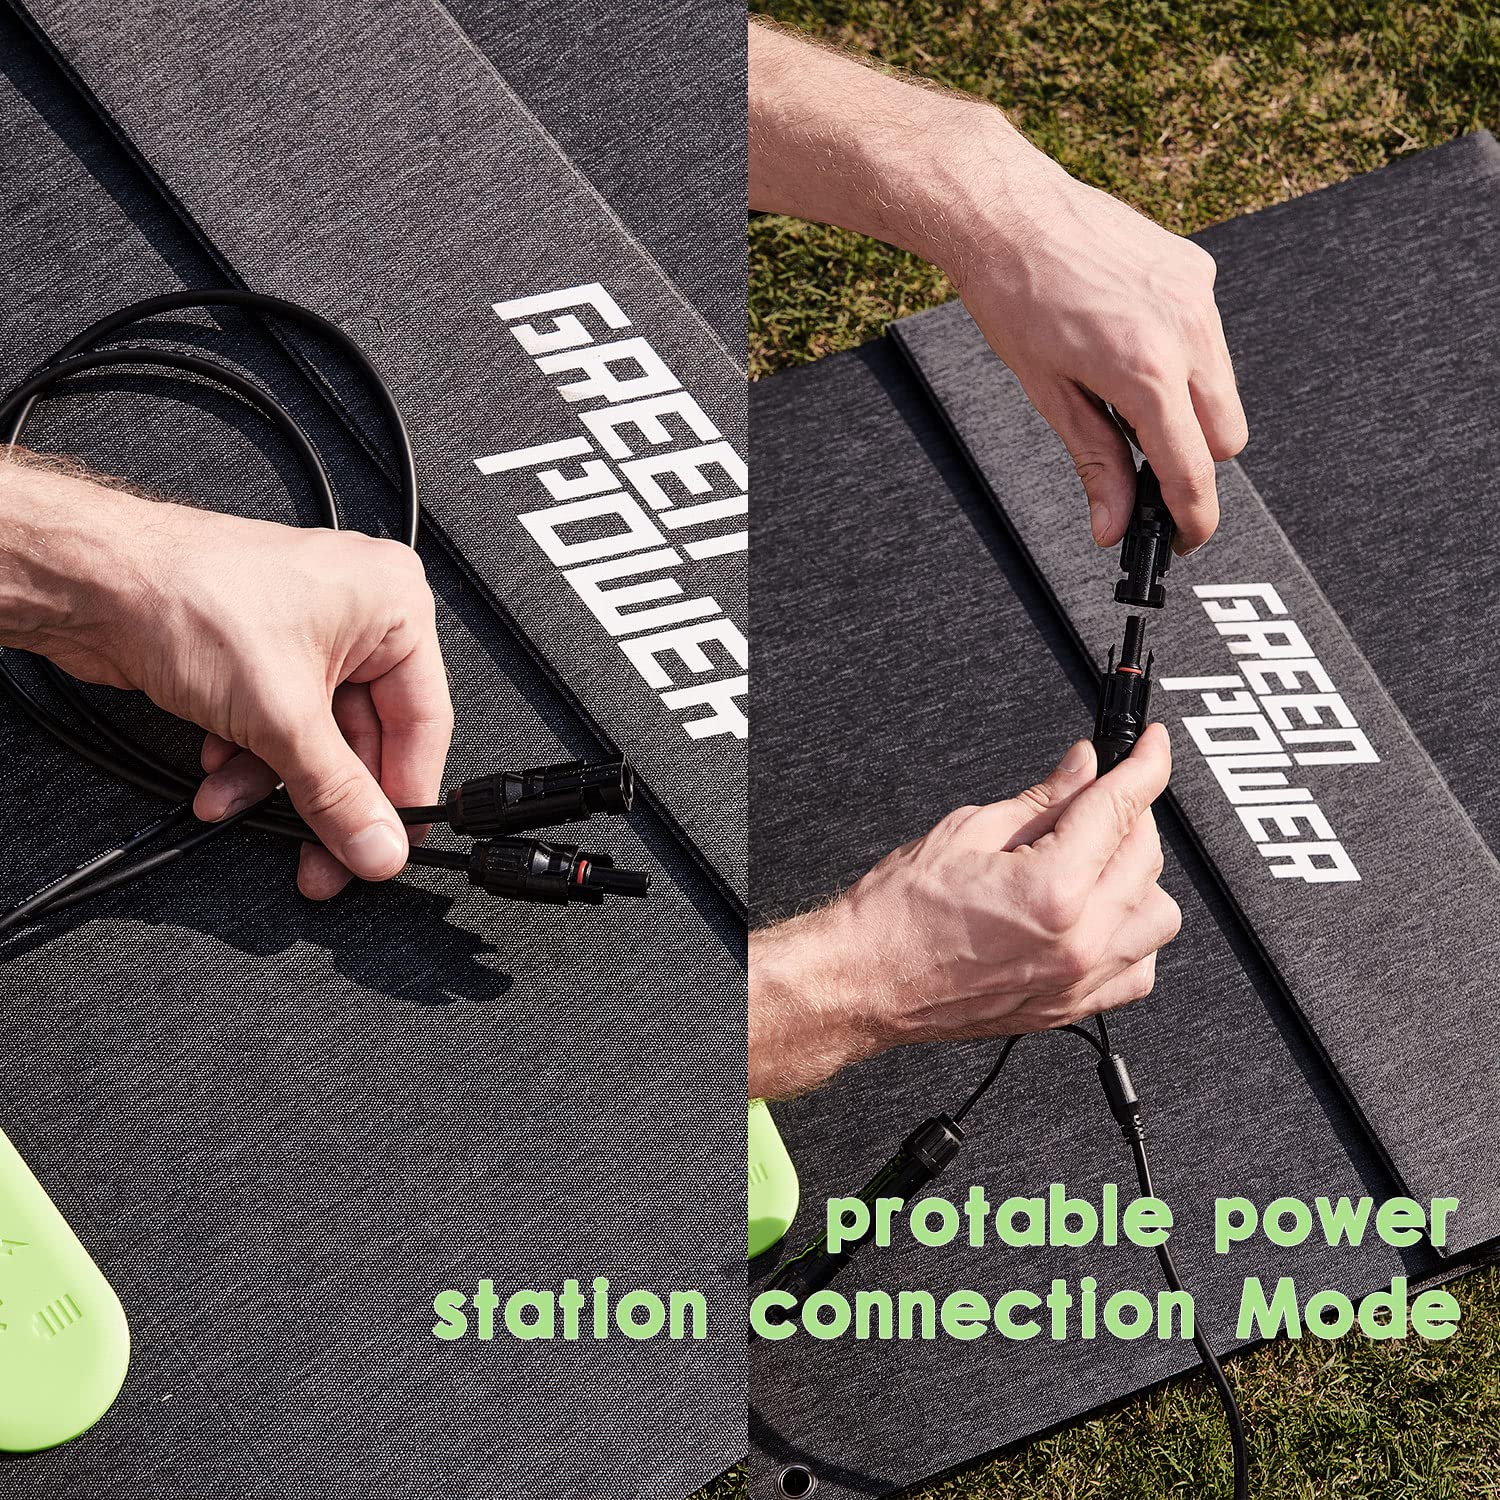 Green Power 100W Solar Panel Monocrystalline ETFE Cover Portable Foldable Solar Charger for Portable Power Station Generator USB QC 3.0, Typc C Output for Outdoor Camping Van RV Trip